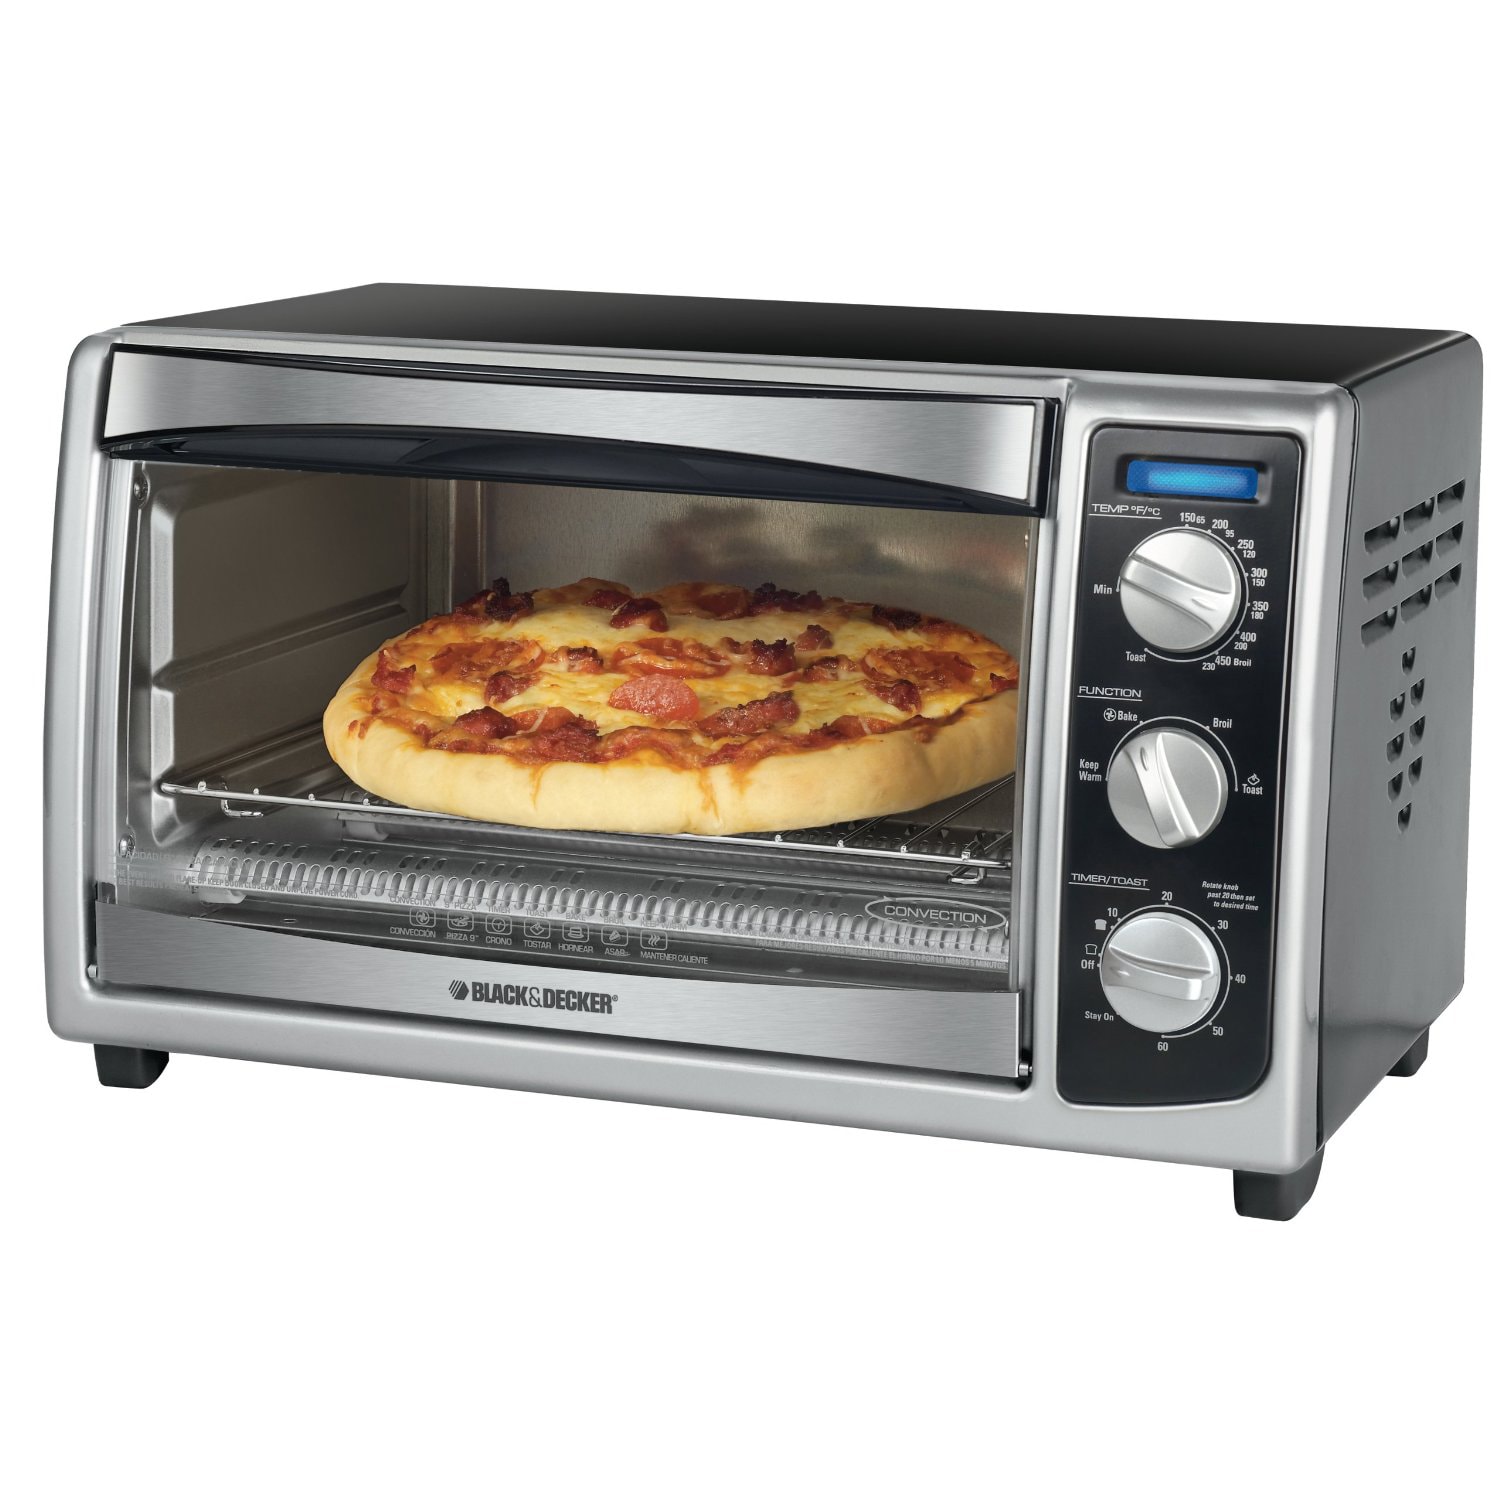 https://ak1.ostkcdn.com/images/products/6636079/6636079/Black-Decker-Stainless-Steel-Six-slice-Toaster-Oven-L14200190.jpg